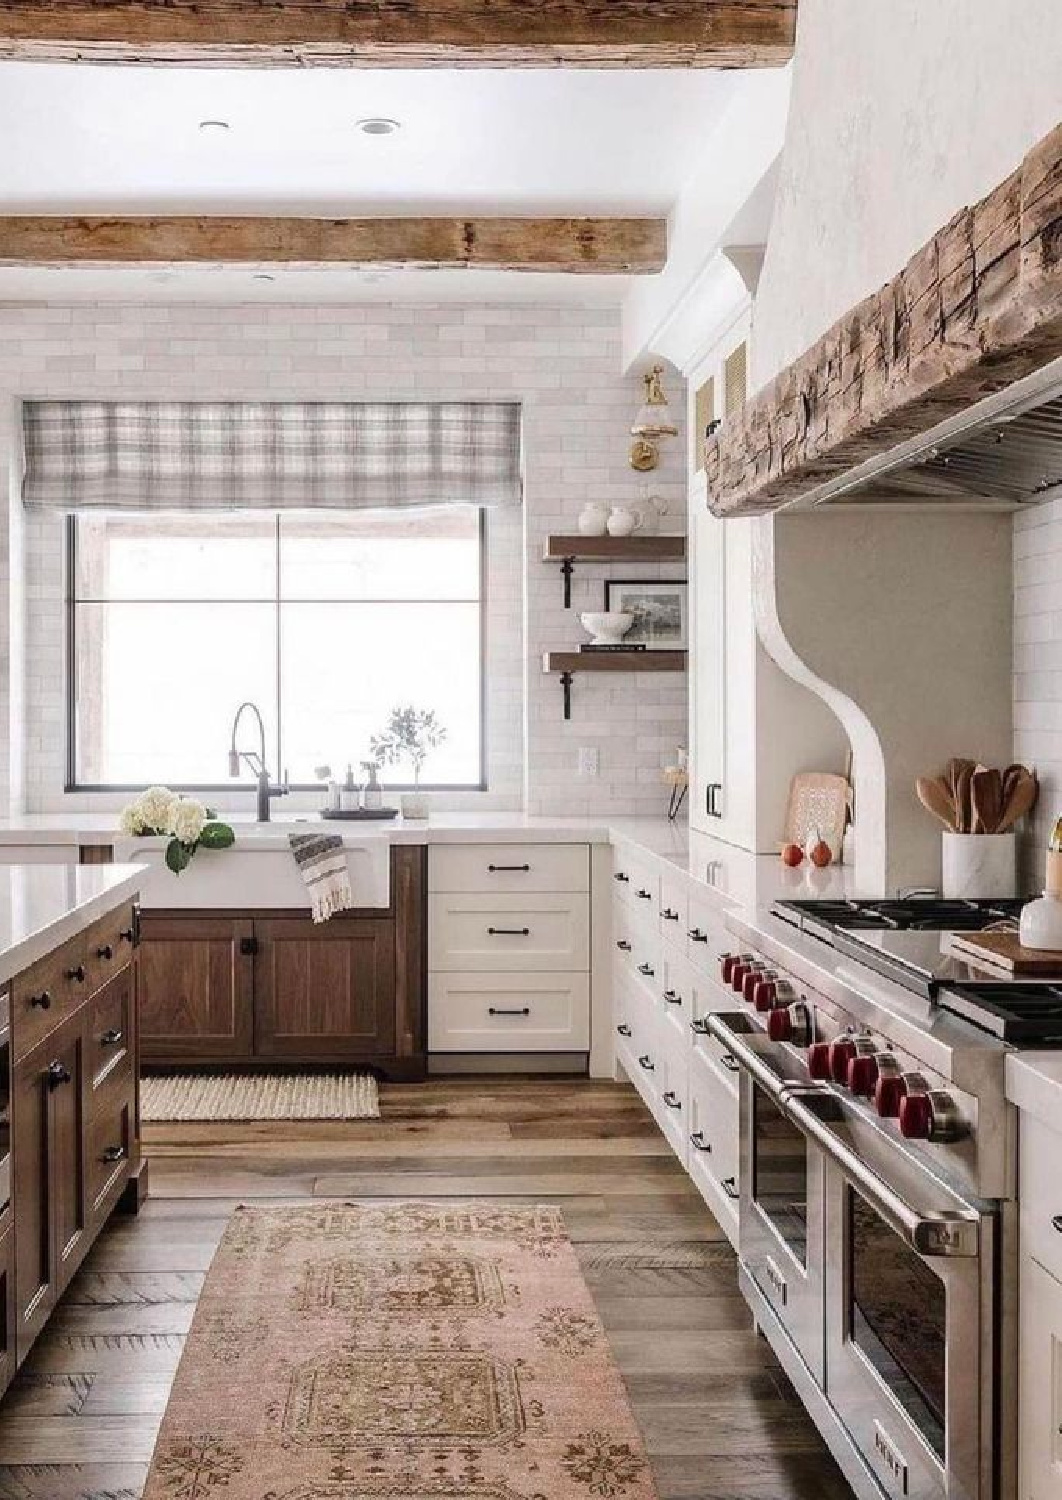 Beautiful rustic elegant kitchen with two tone cabinetry. AI Design via Whitney Hess (Just Decorate!). #aidesign #aiinteriordesign #aiarchitecture #aikitchen